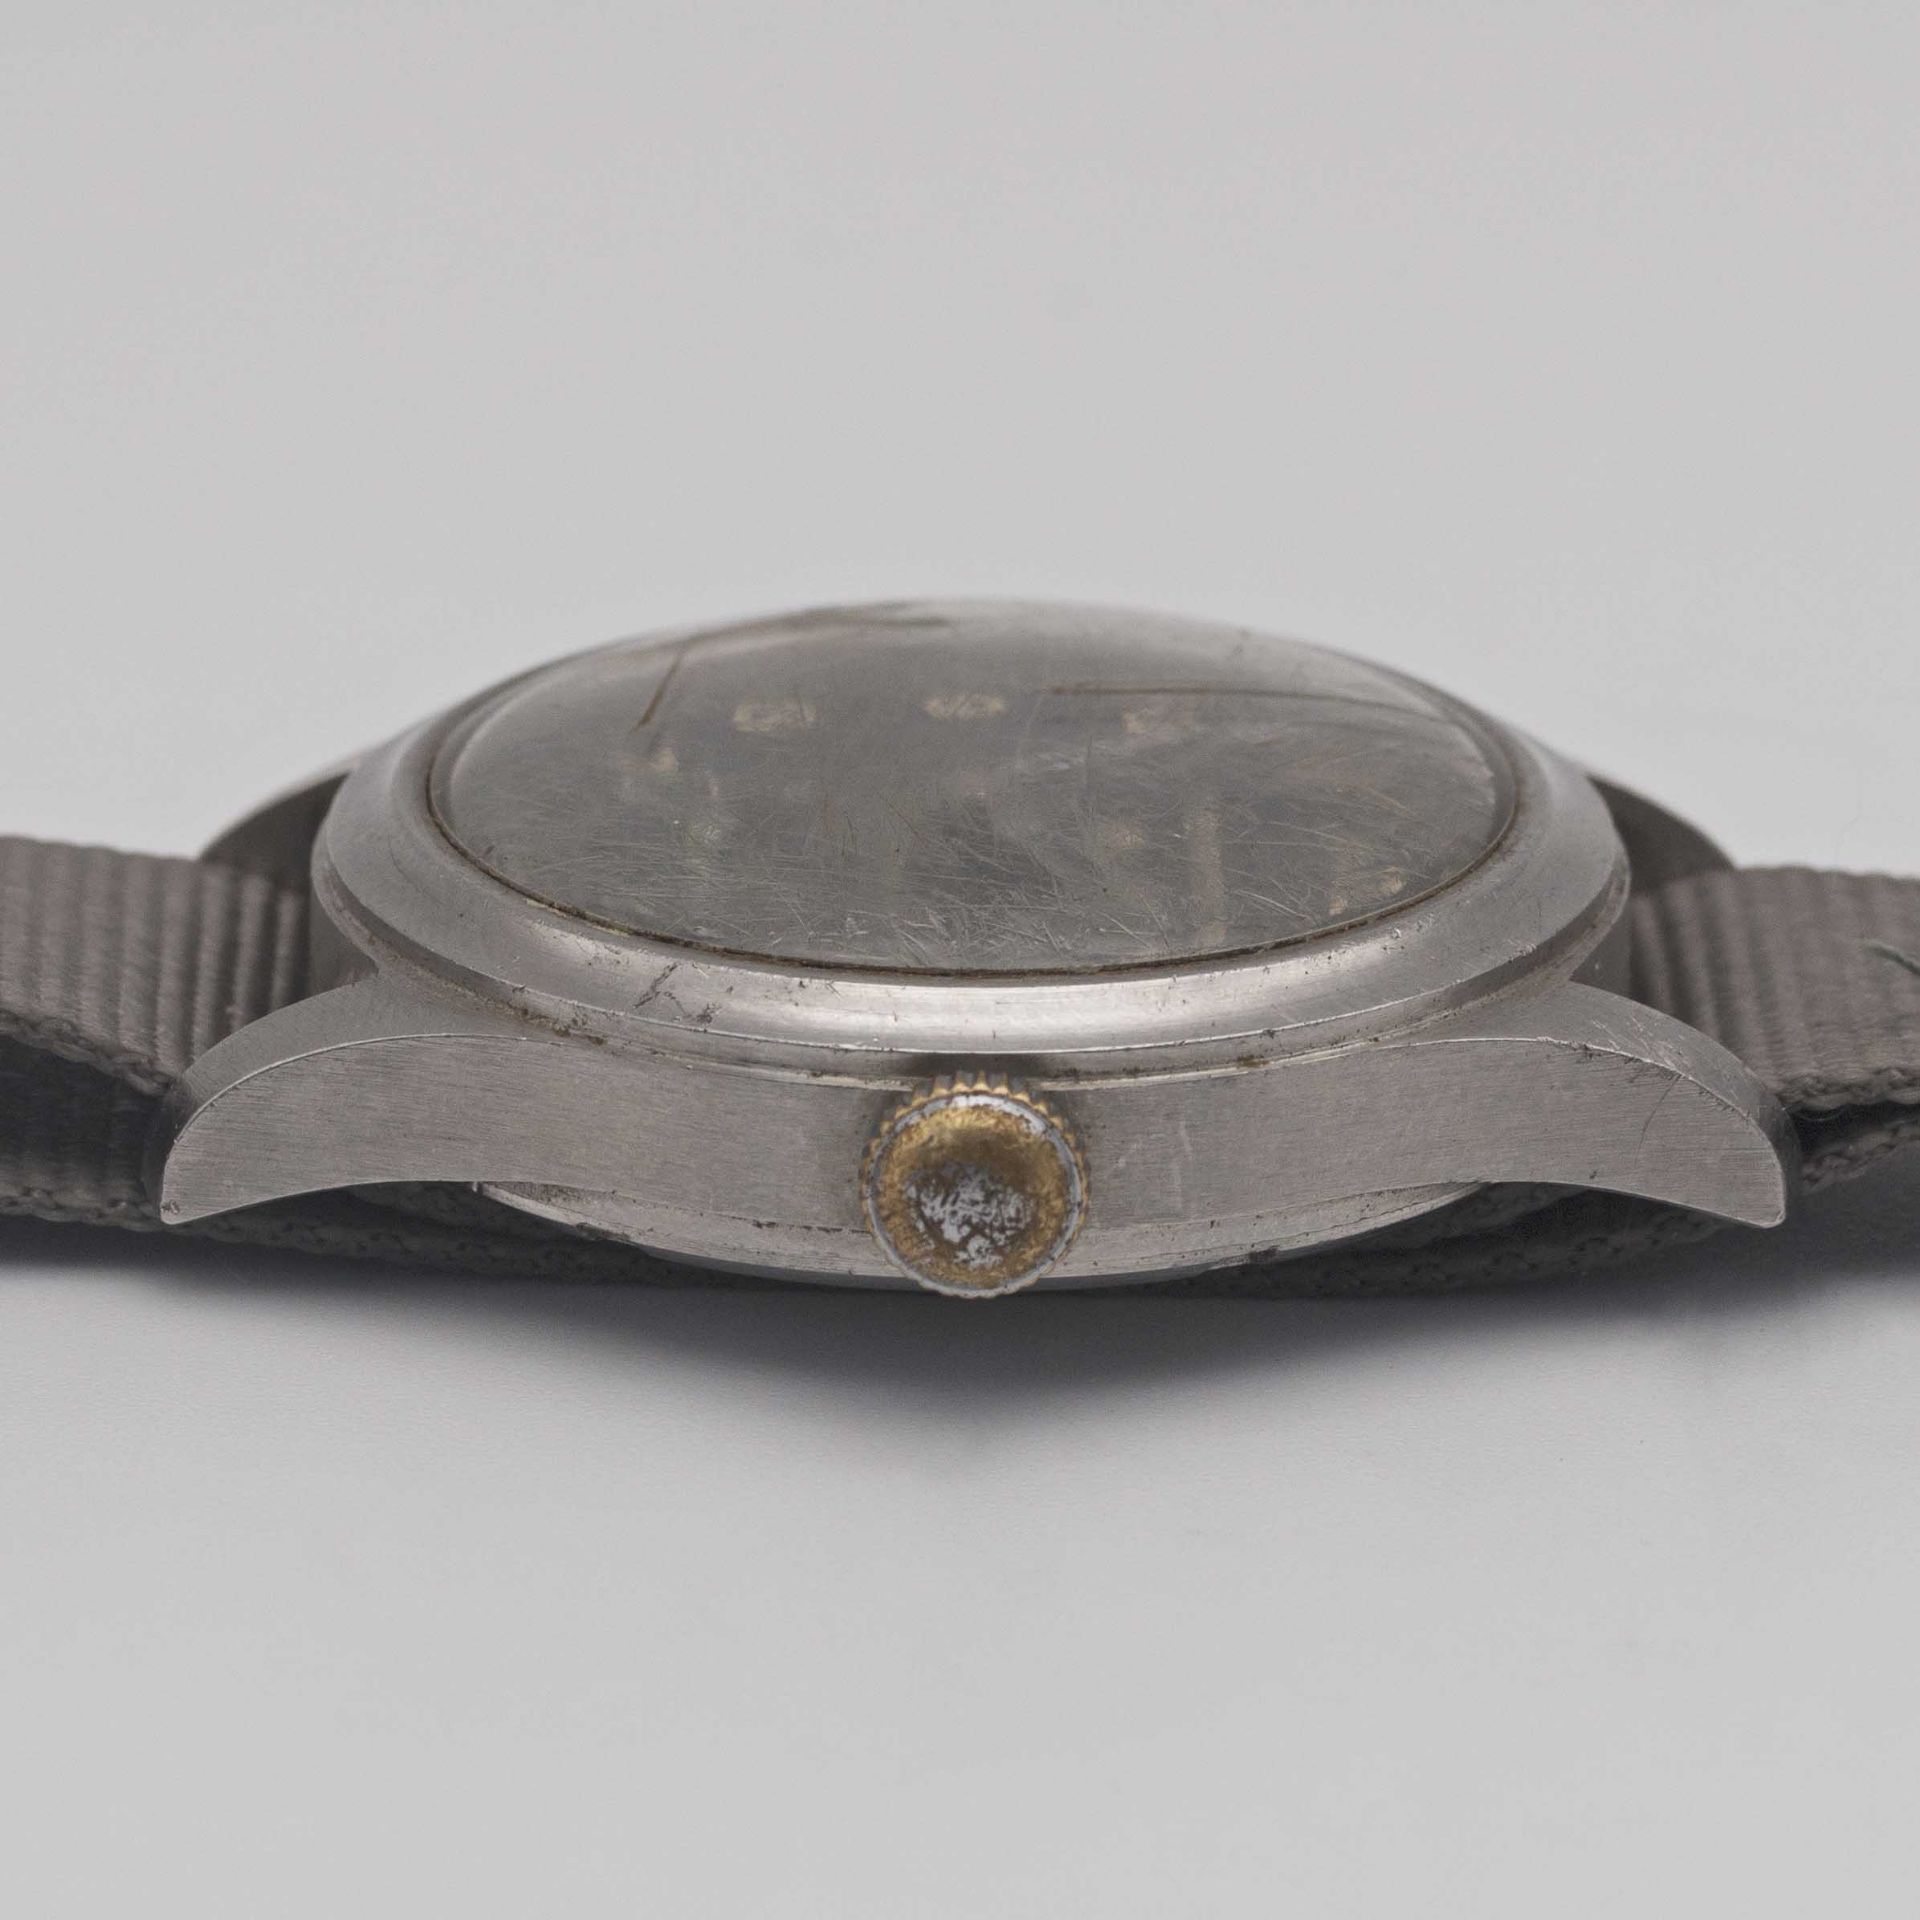 A GENTLEMAN'S STAINLESS STEEL BRITISH MILITARY ETERNA W.W.W. WRIST WATCH CIRCA 1940s, PART OF THE " - Image 9 of 10